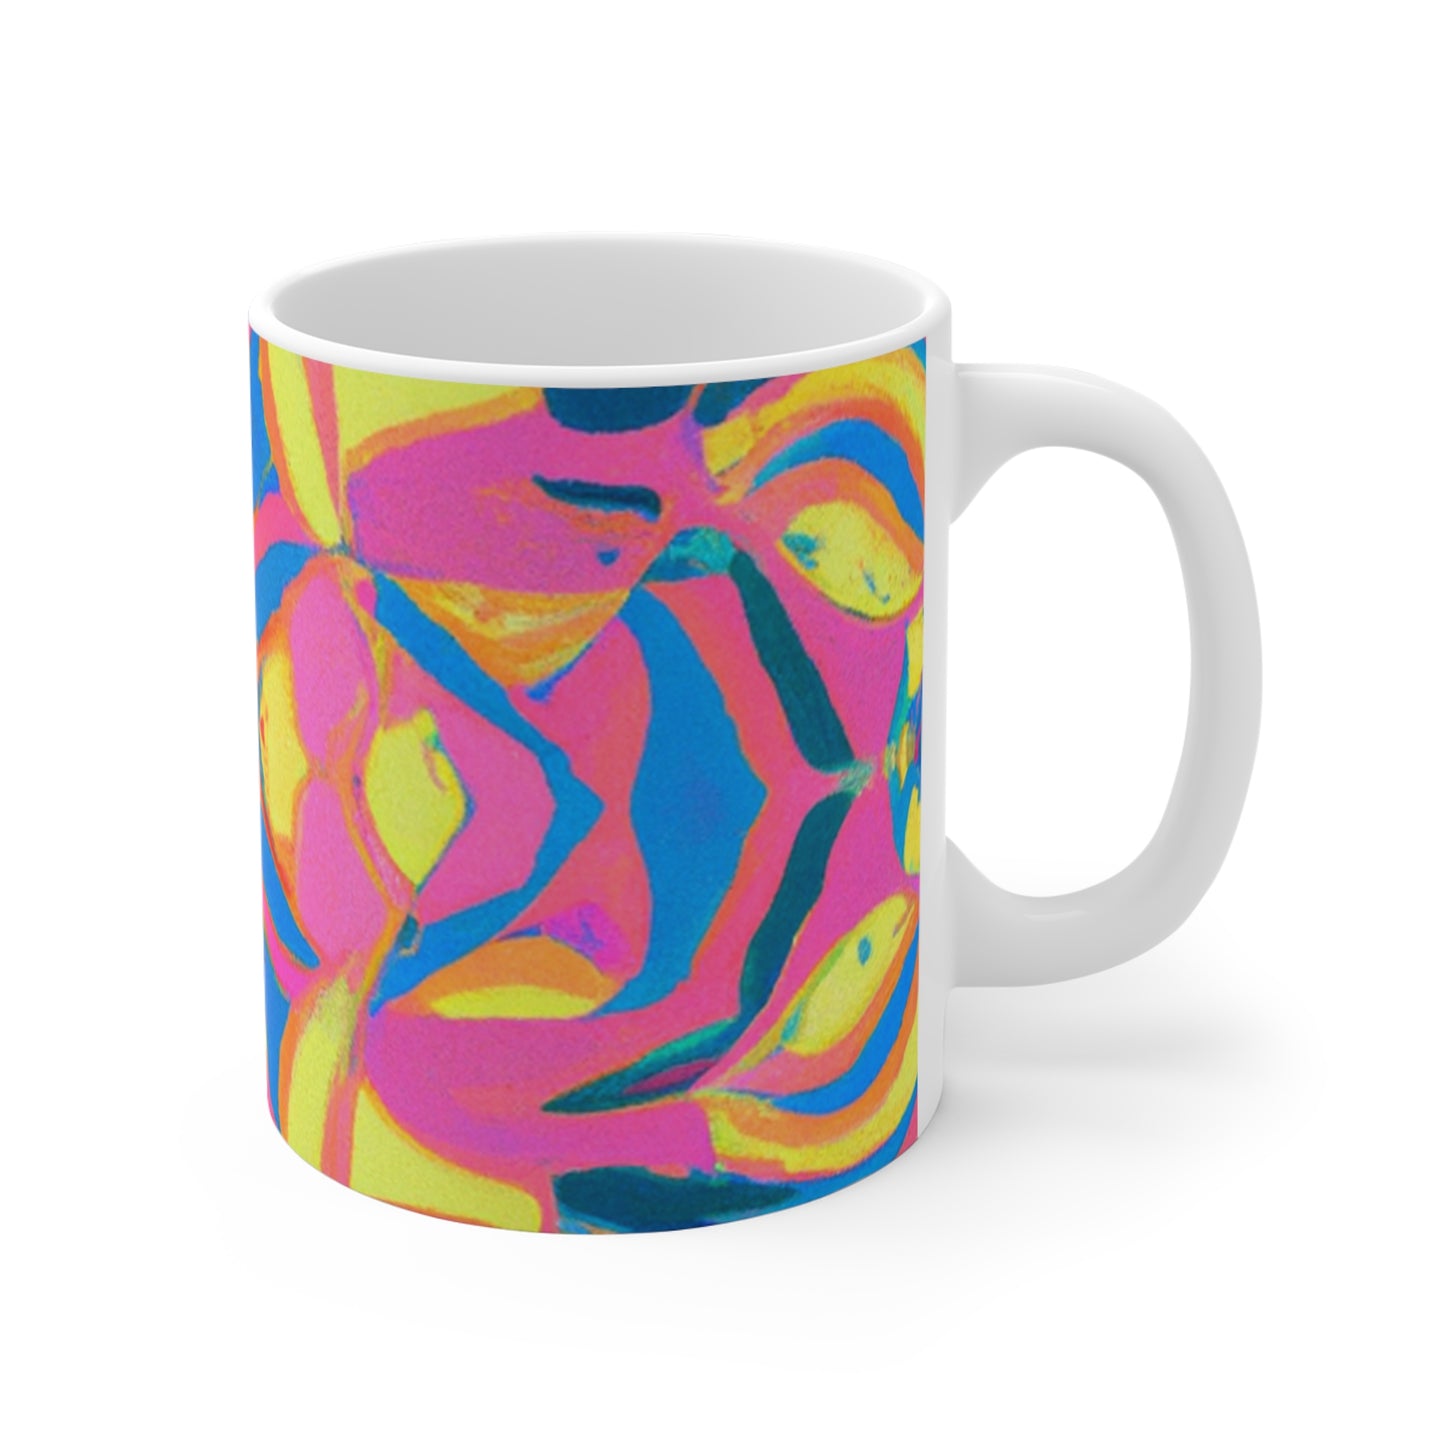 Brewmaster Frankie - Psychedelic Coffee Cup Mug 11 Ounce